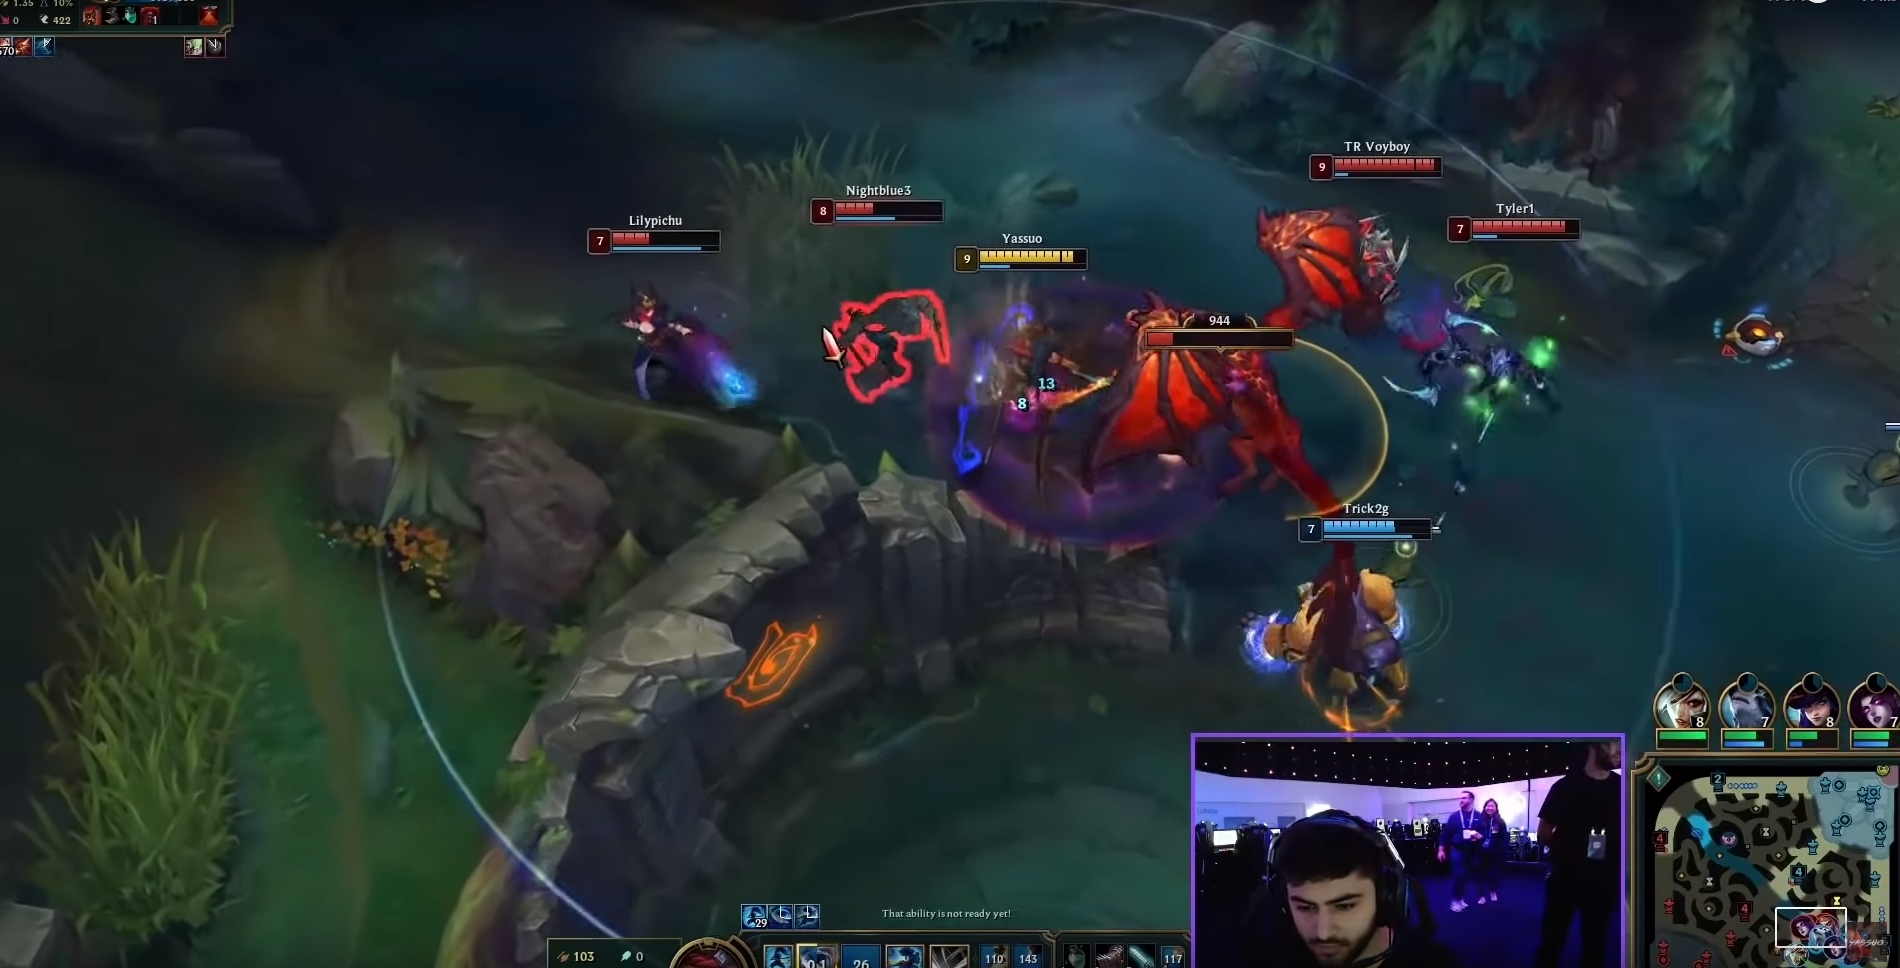 Tyler1’s Twitch Rivals Team Beat Yassuo’s Twitch Rivals Team To Become The League Of Legends Champions